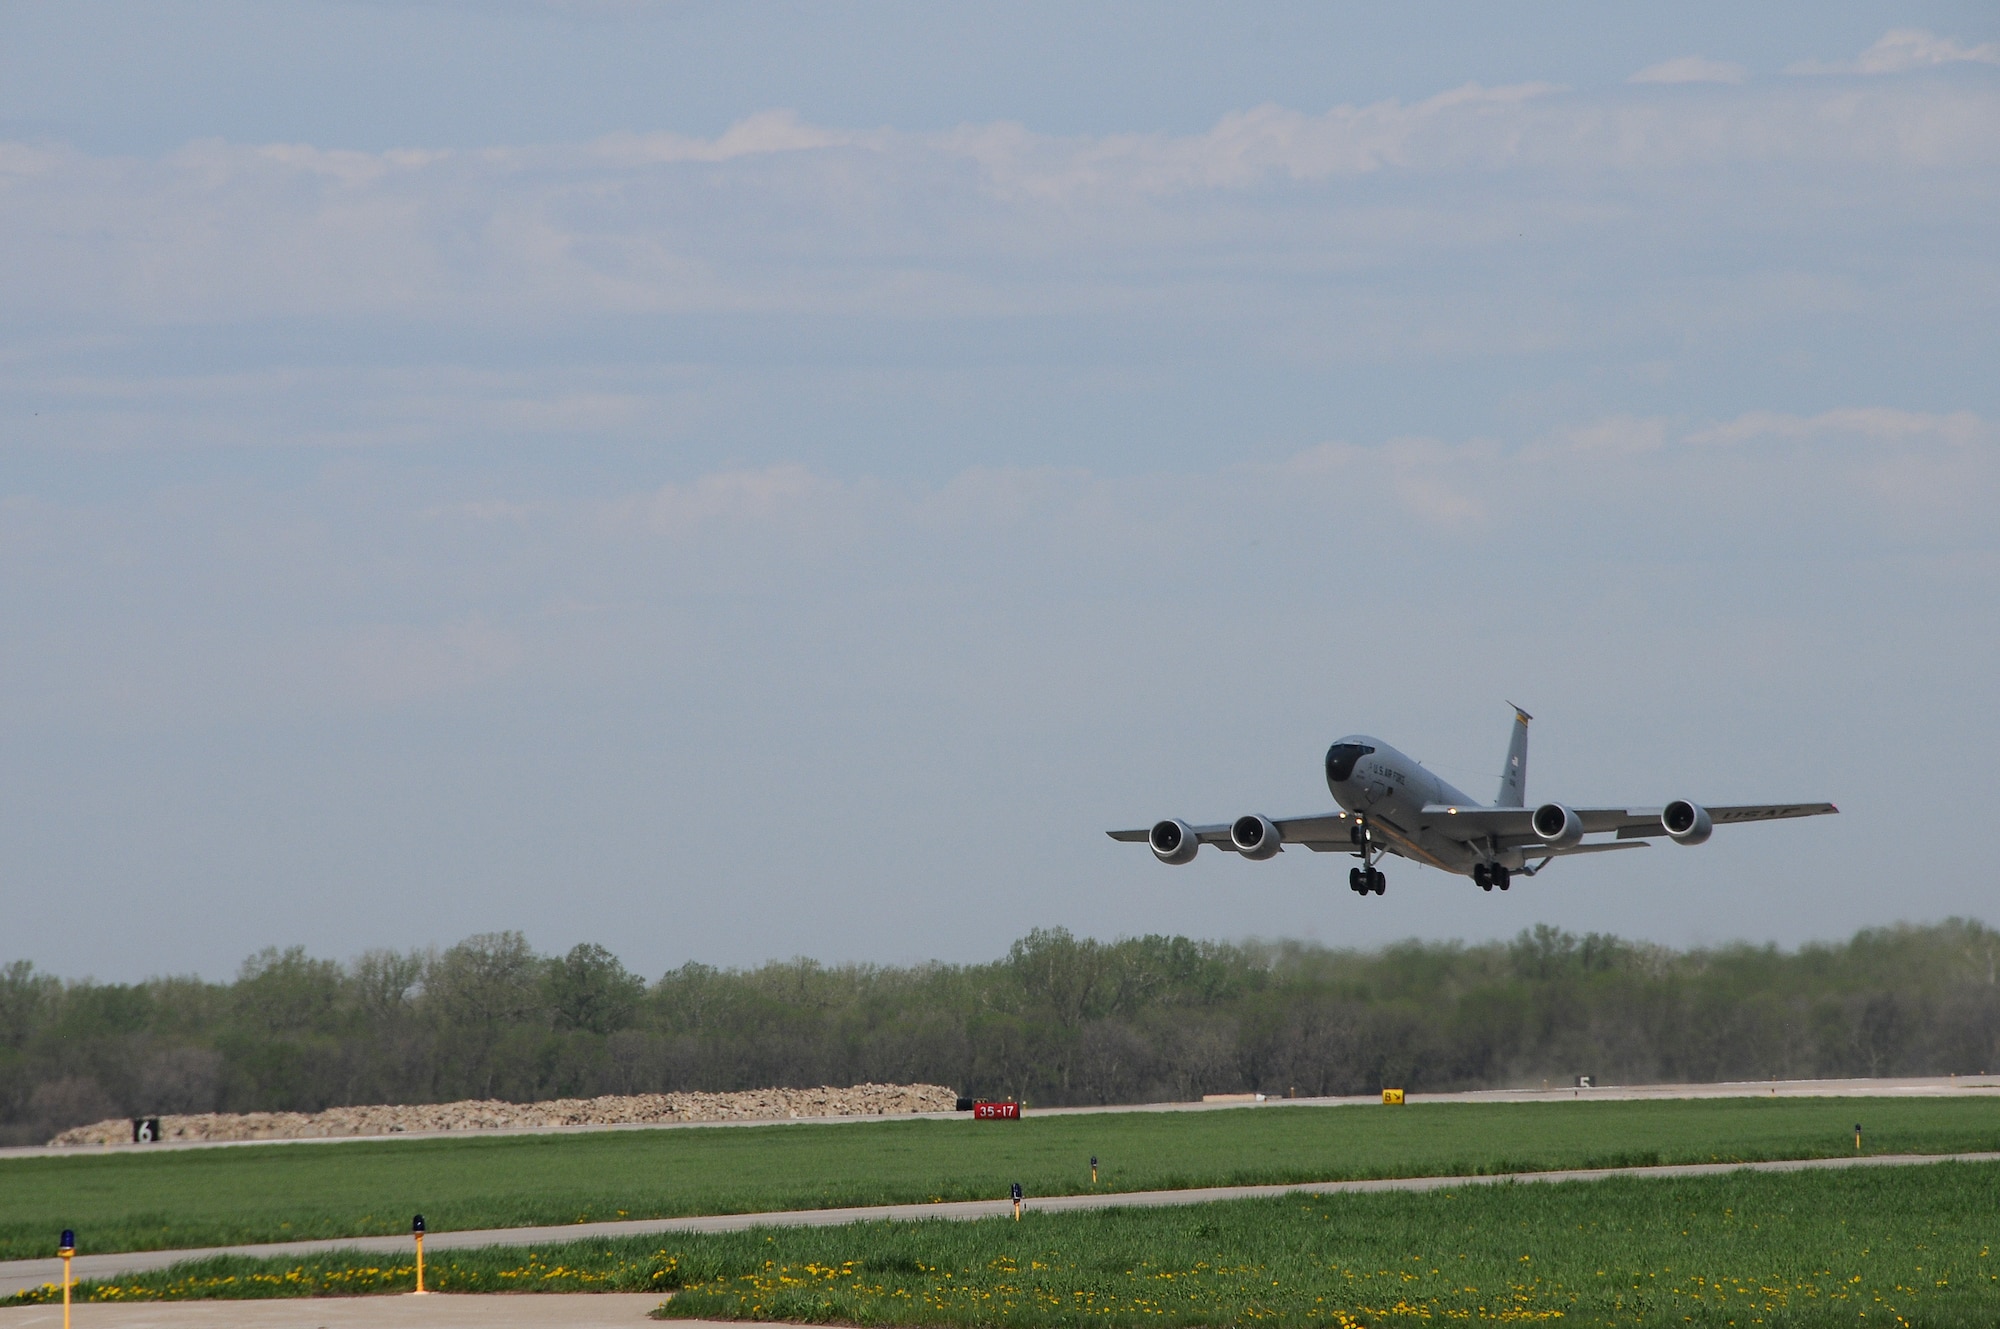 A KC-135 dubbed “Raider Nation” lifts off from the runway at the Air National Guard Base in Sioux City, Iowa for a local flying mission. This will be one of its last missions with the Iowa Air Guard. The KC-135 will soon be transferred to the Utah Air National Guard.
U.S. Air Guard Photo by: Master Sgt. Vincent De Groot /released